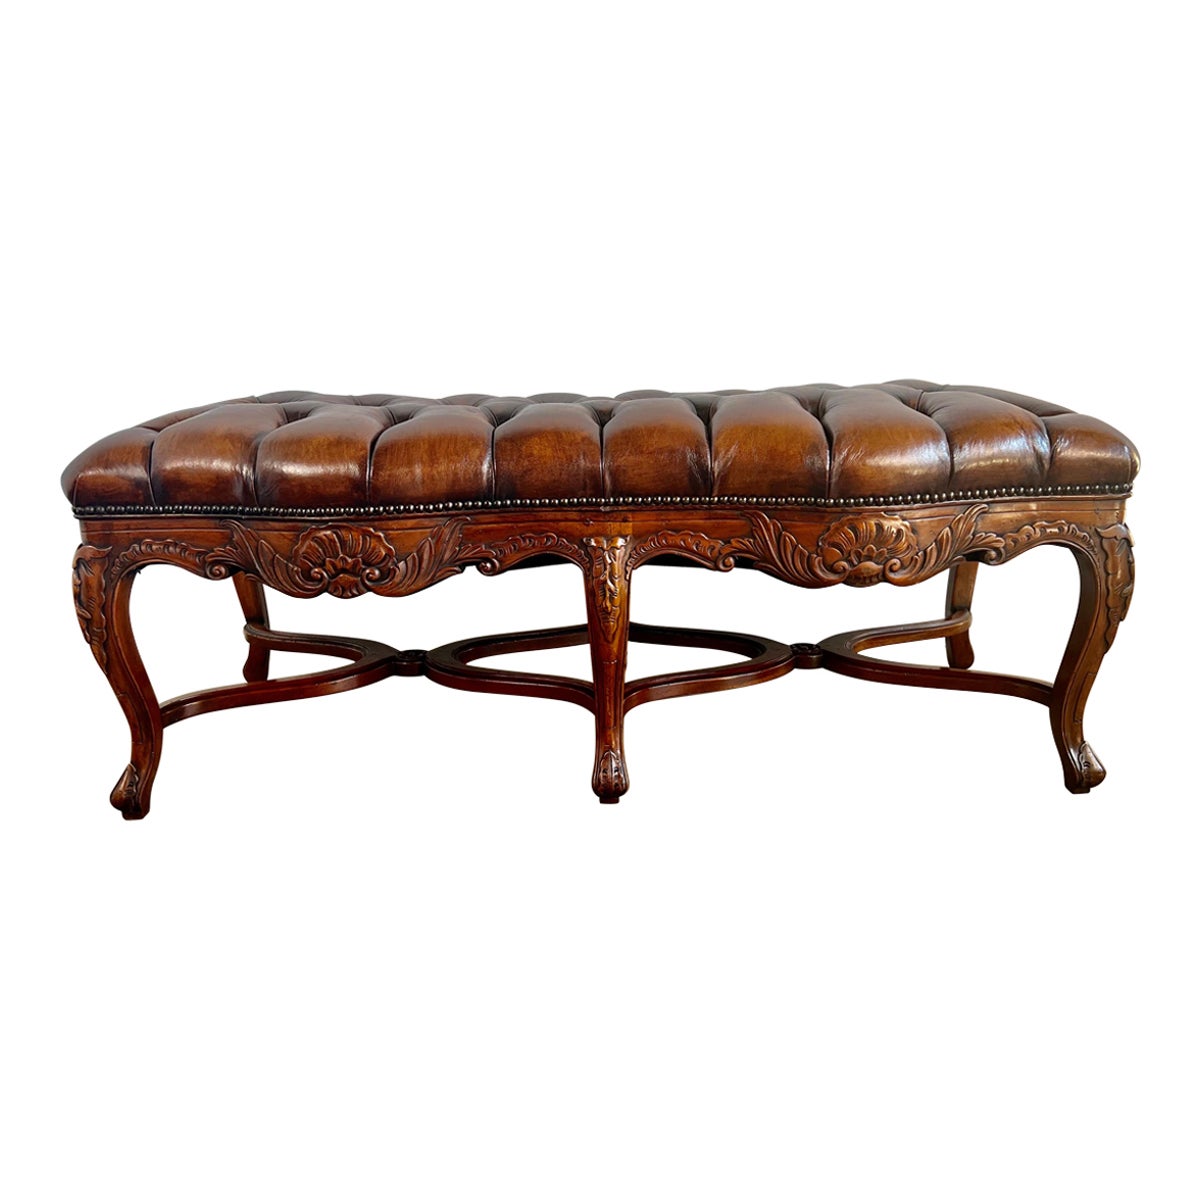 6-Legged French Louis XV Style Leather Tufted Bench